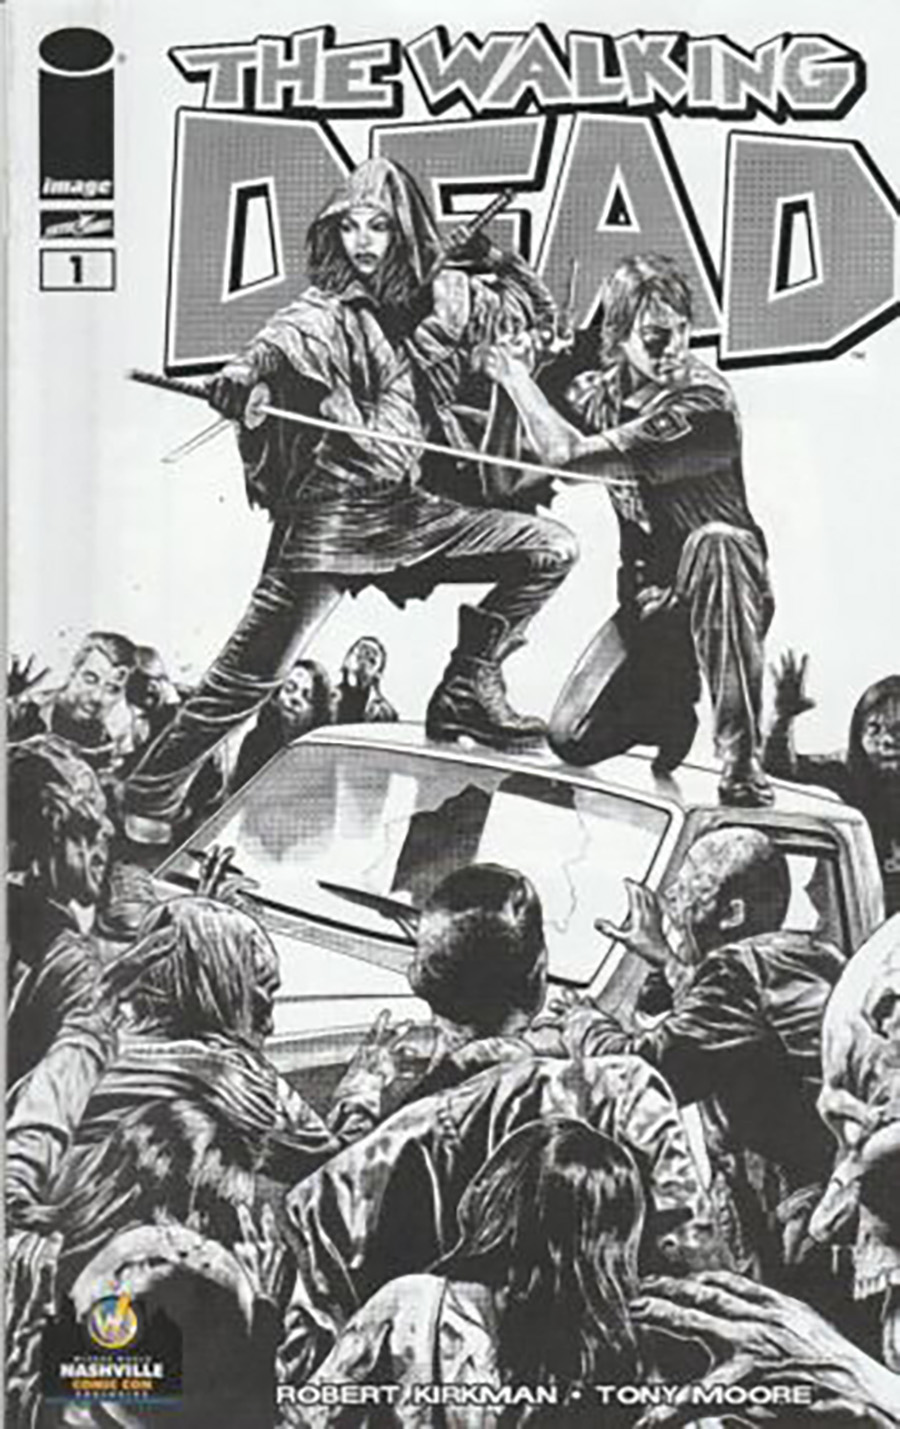 Walking Dead #1 Cover Z-Z-C Wizard World Nashville Comic Con Exclusive Mico Suayan Black & White Variant Cover Signed By Mico Suayan